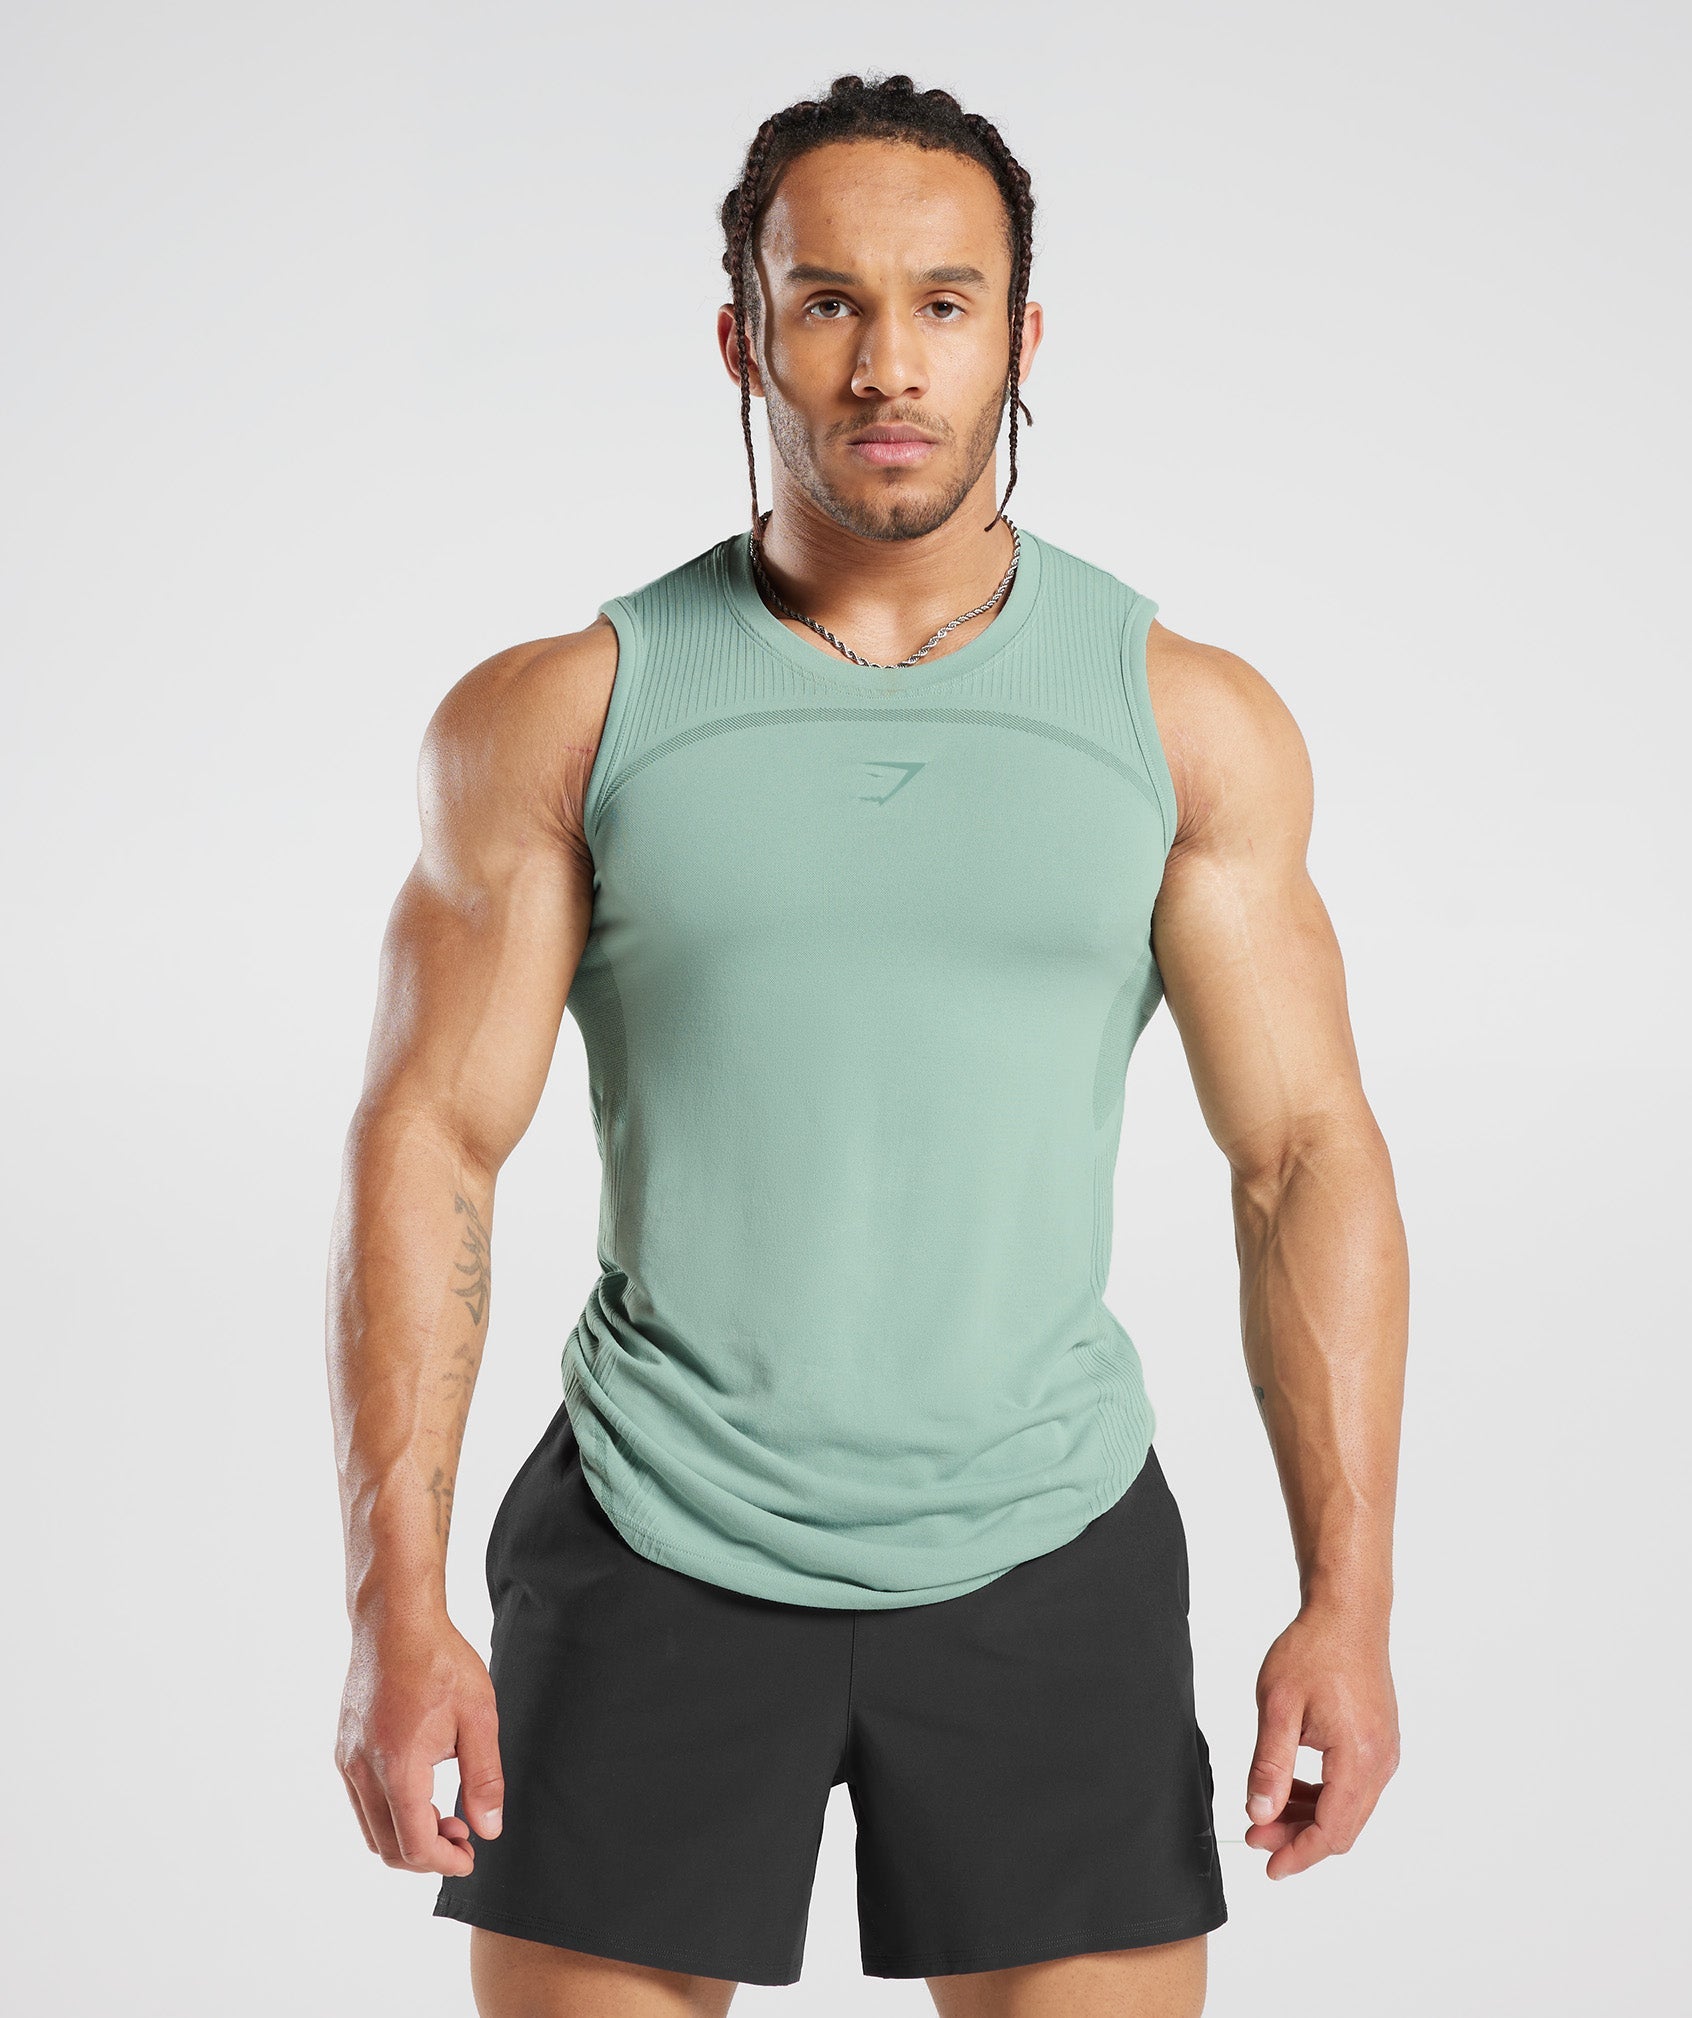 315 Seamless Tank in Frost Teal/Ink Teal - view 1